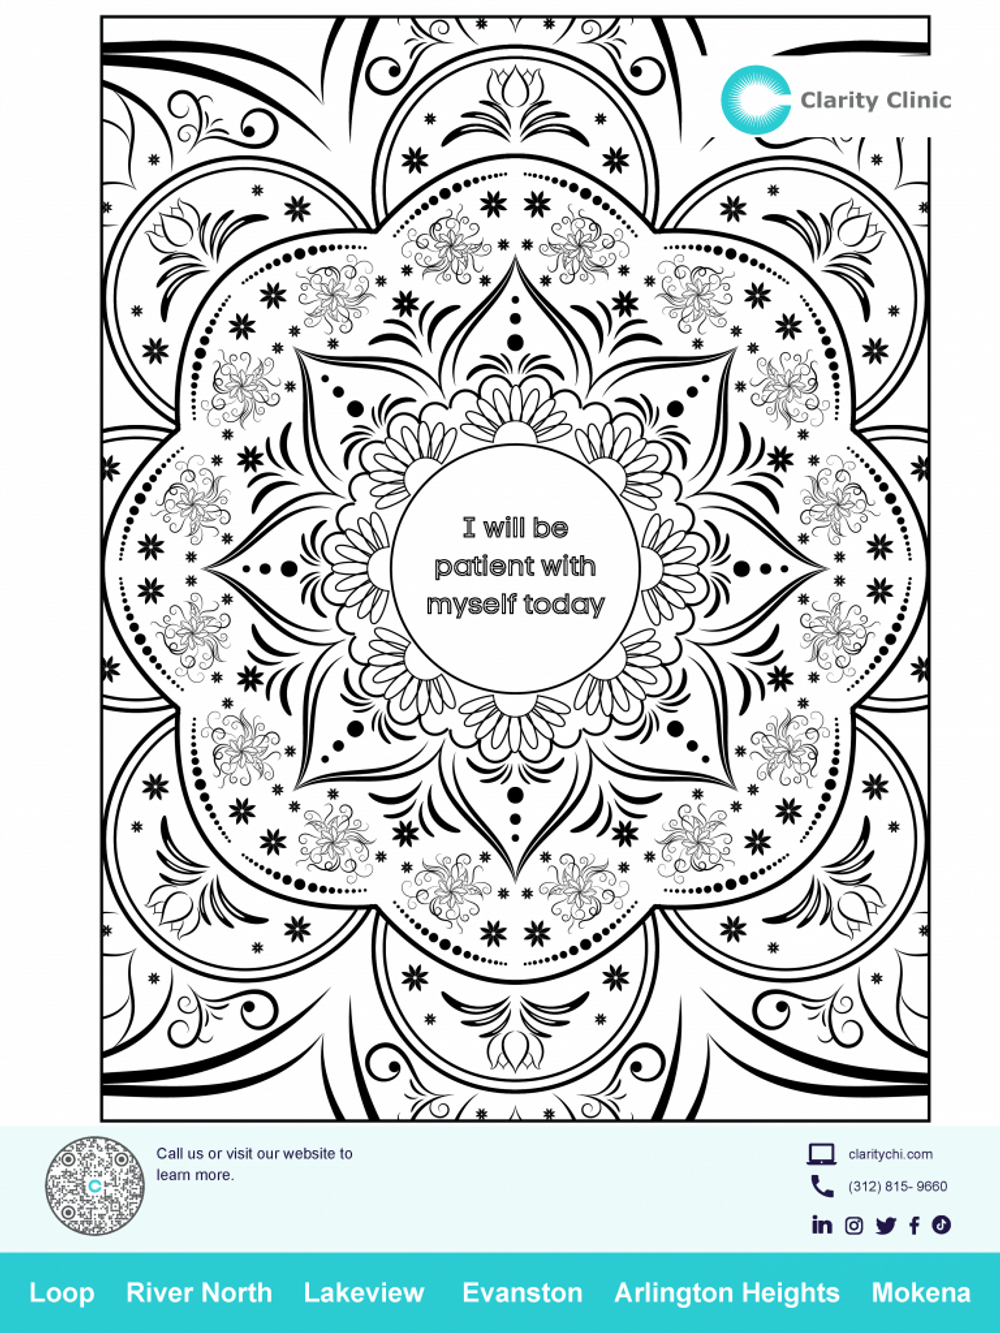 Clarity Clinic Coloring Sheet - I will be patient with myself today